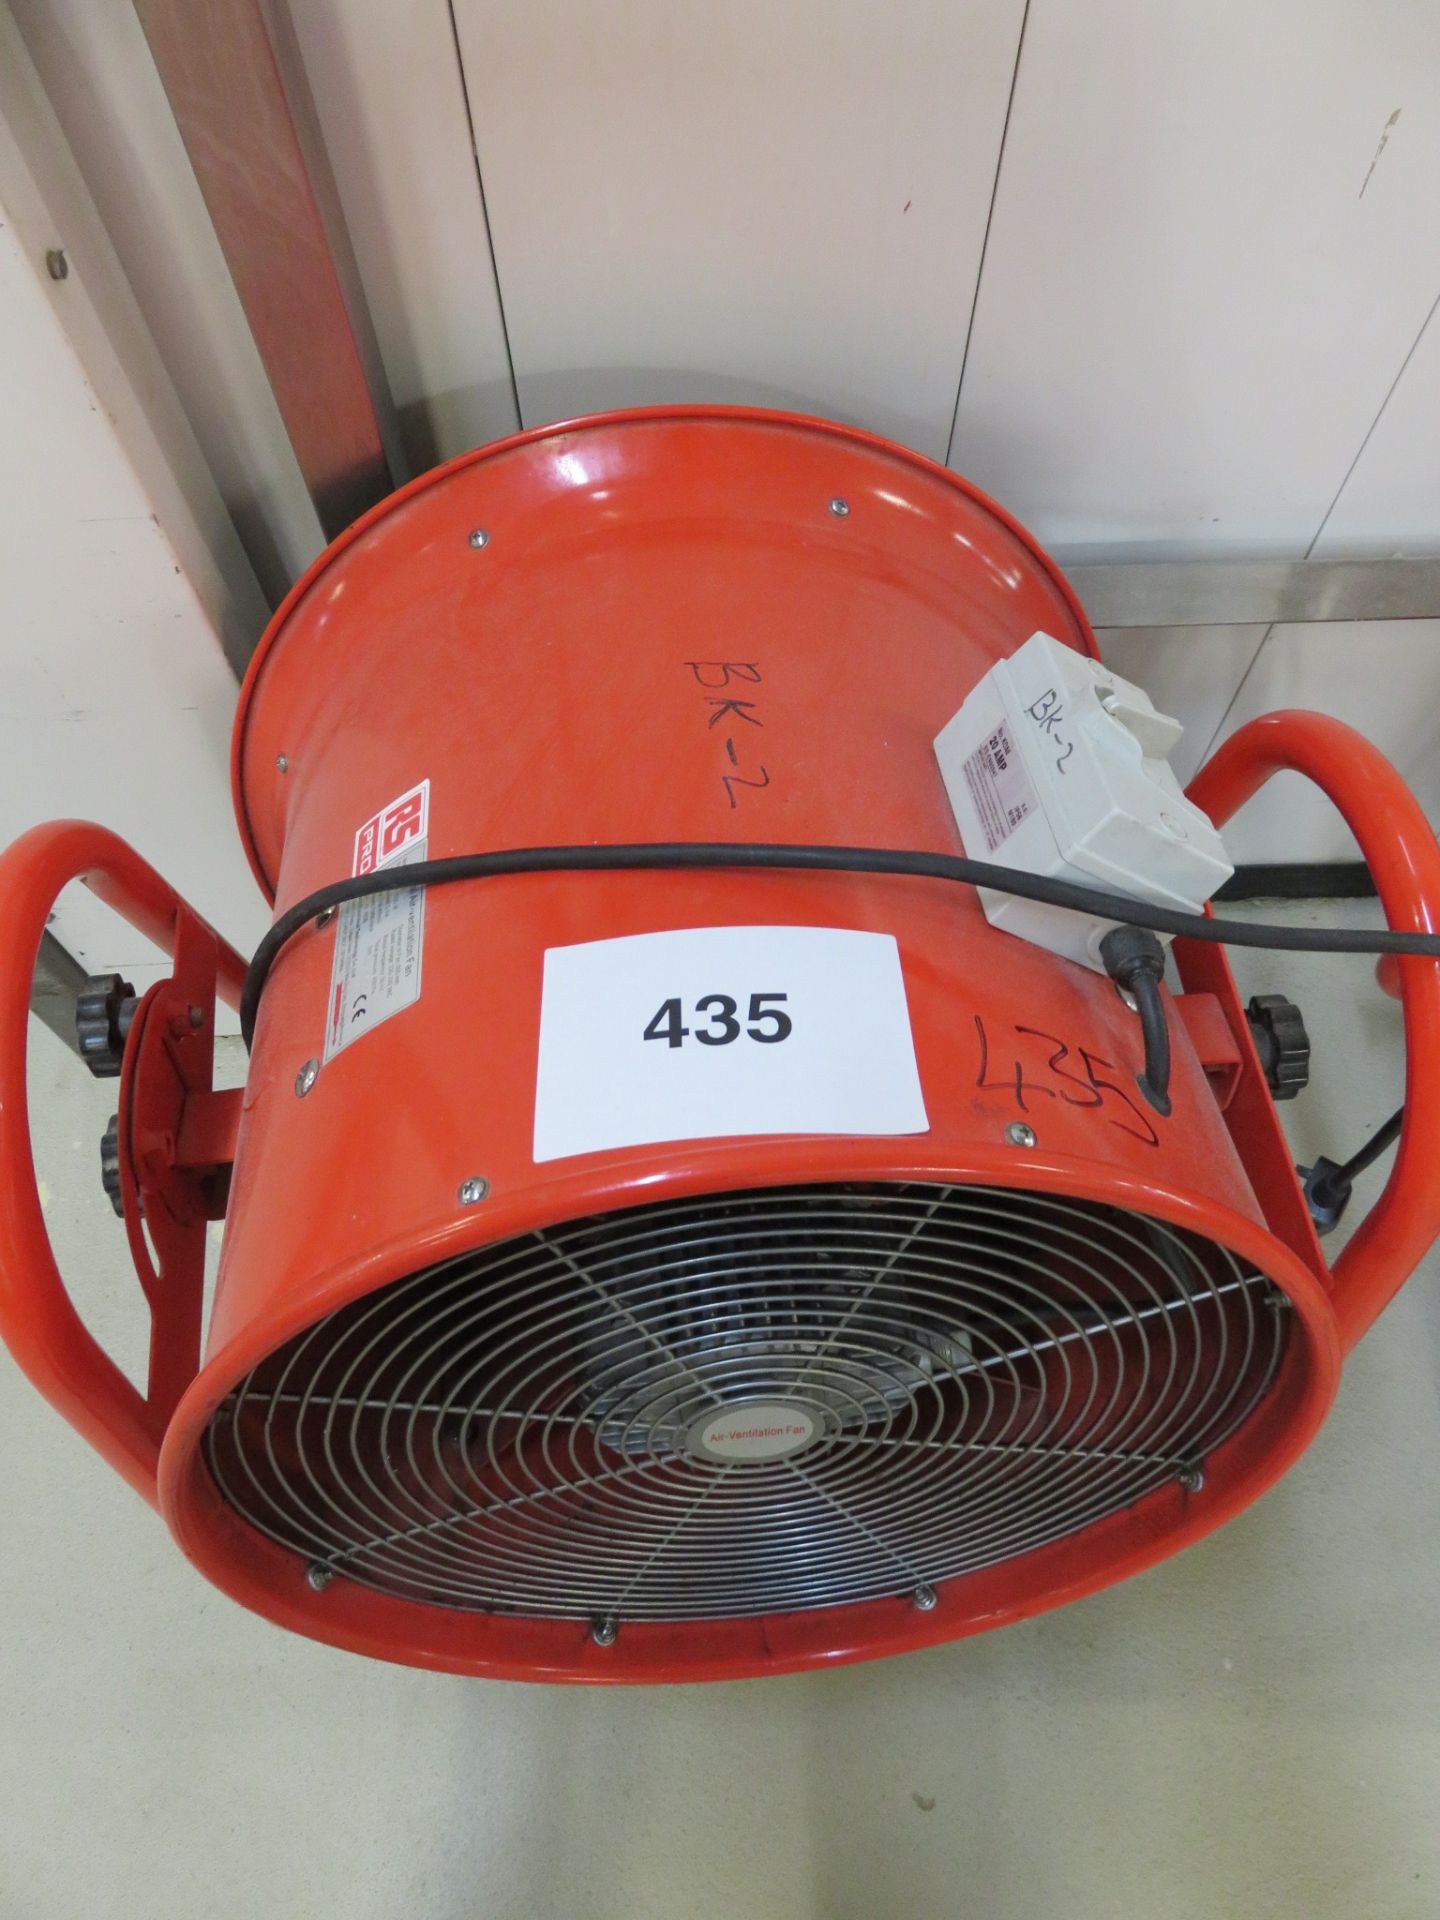 RS Pros Axial Air ventilation Fan. Mobile. Lift out charge £10